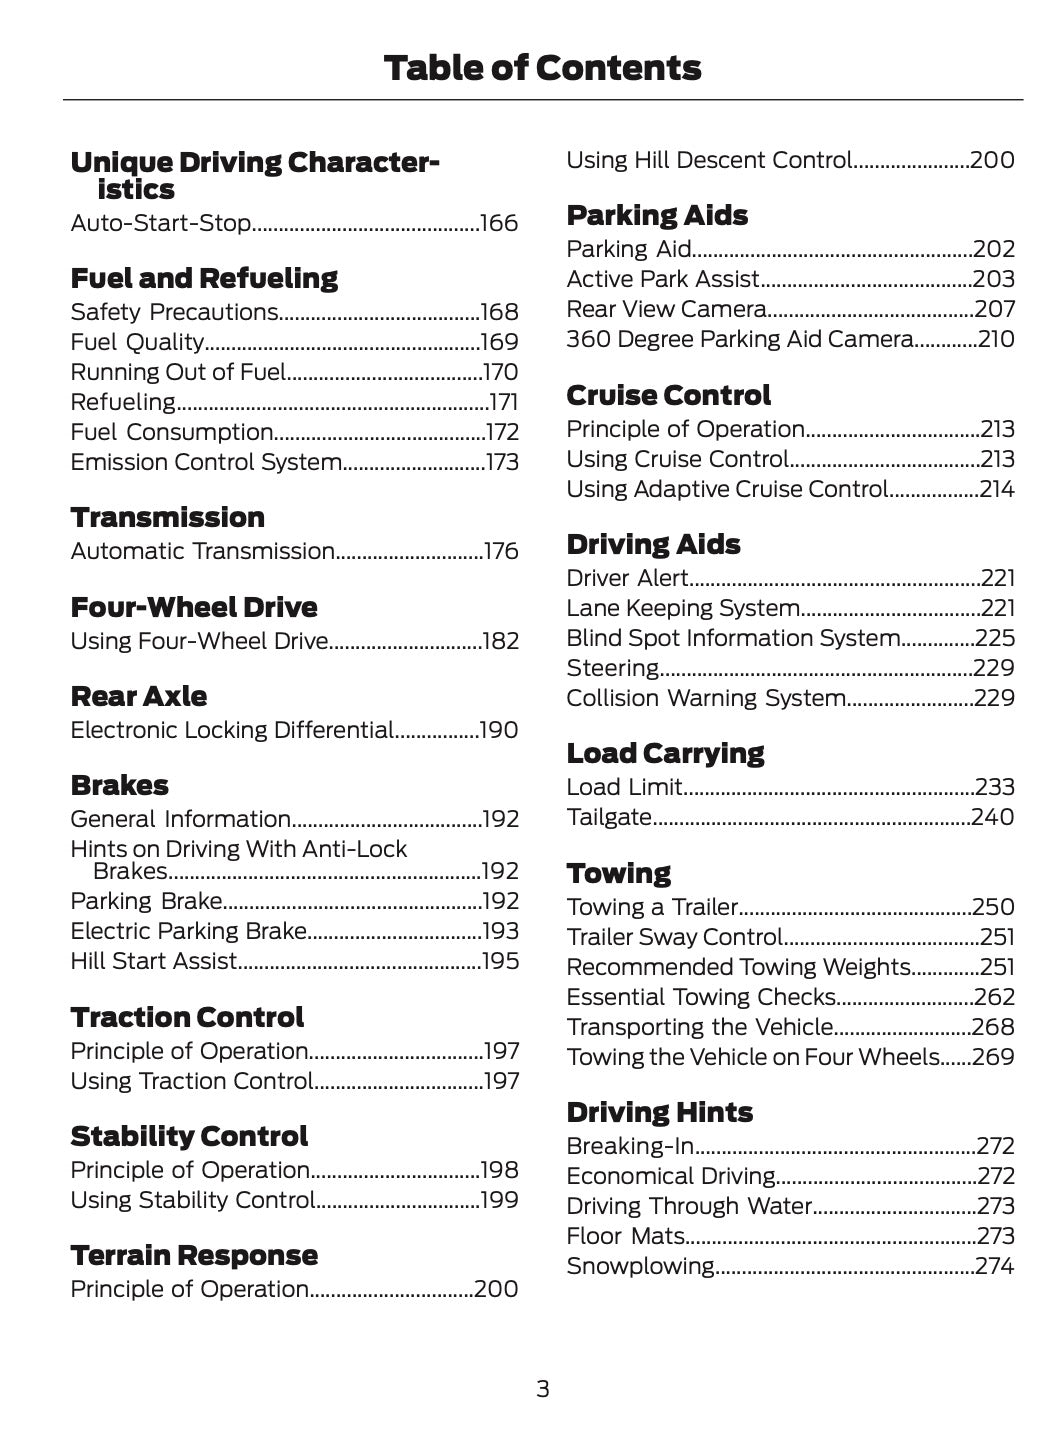 2015 Ford F-150 Owner's Manual | English